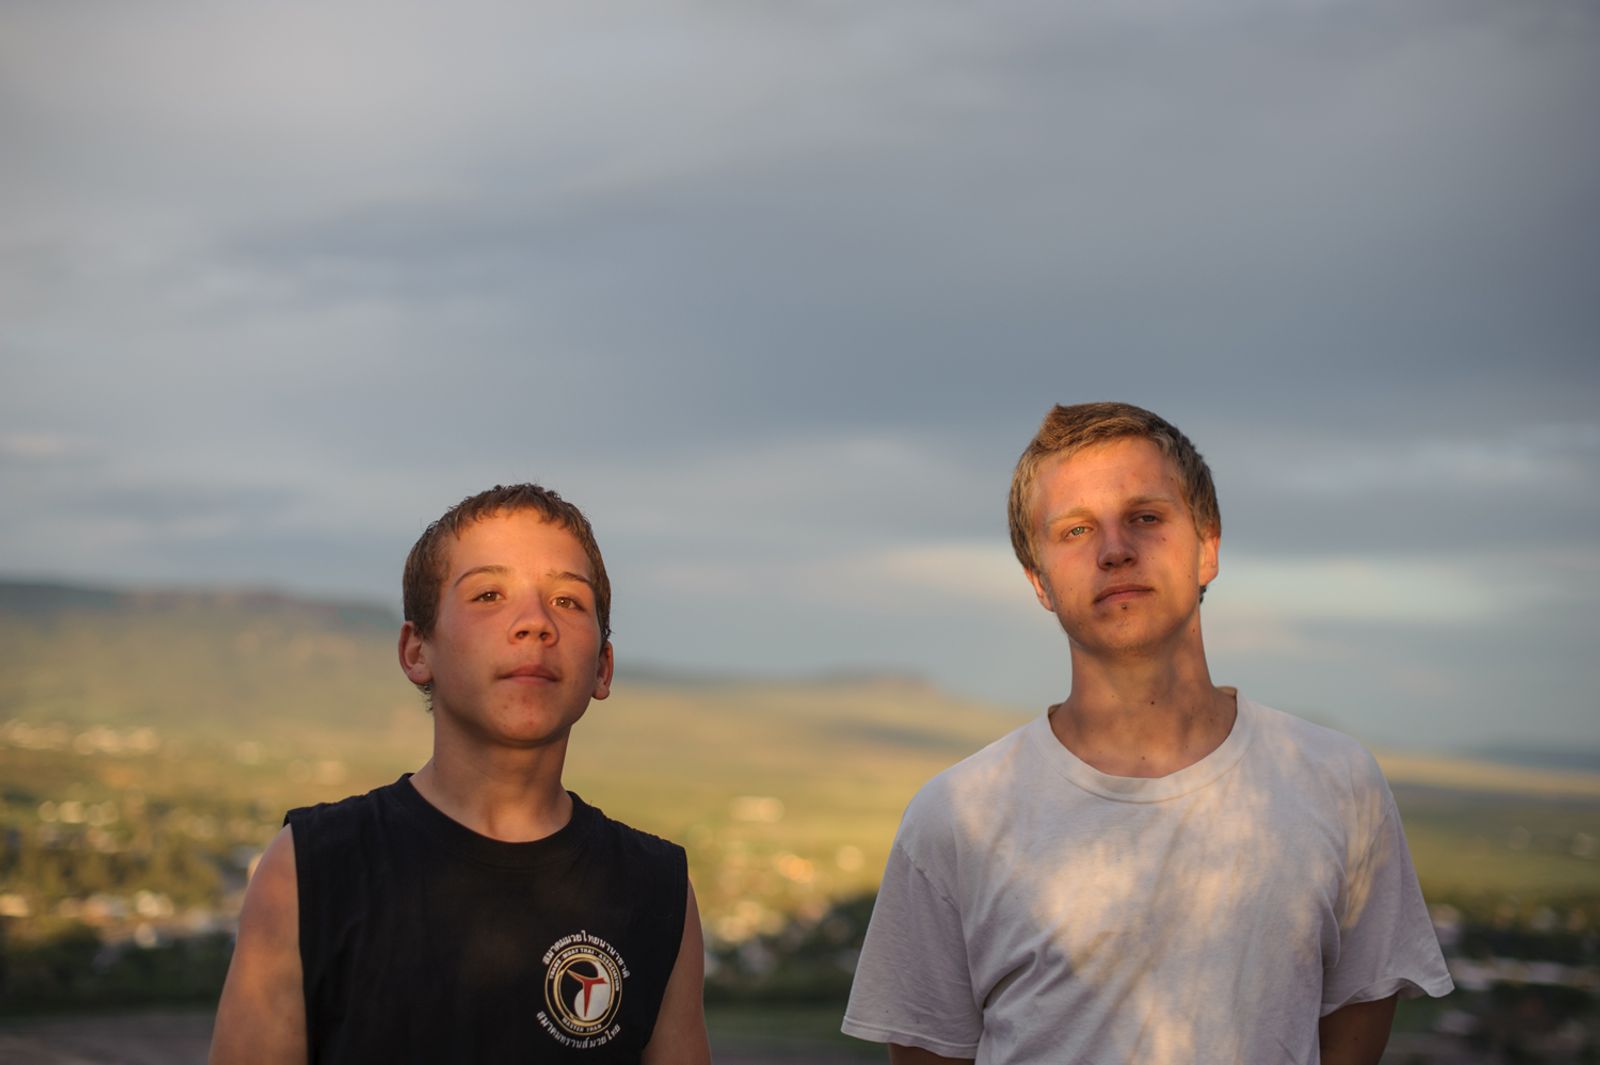 © Isadora Kosofsky - Brothers Vinny and David stand together as the sky darkens before a summer storm.